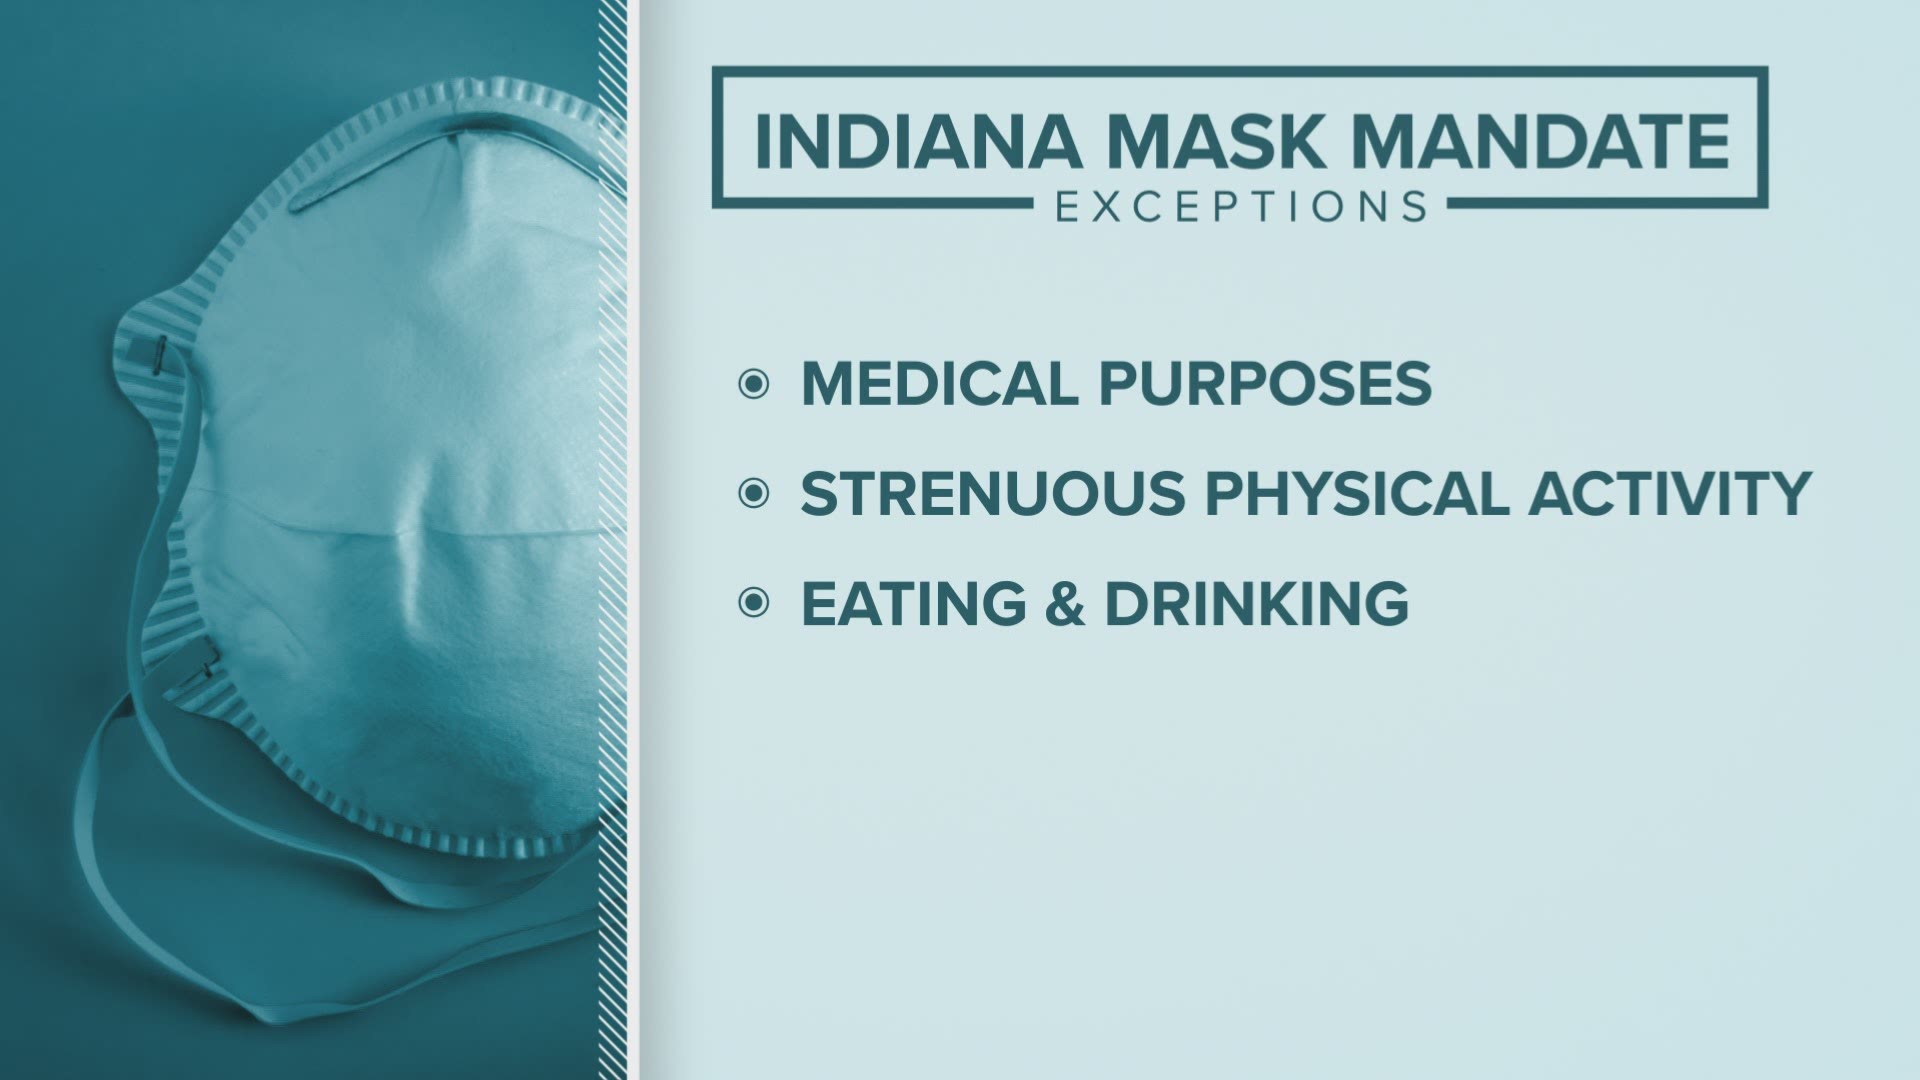 Governor Holcomb announced that a statewide mask mandate will go into effect July 27.